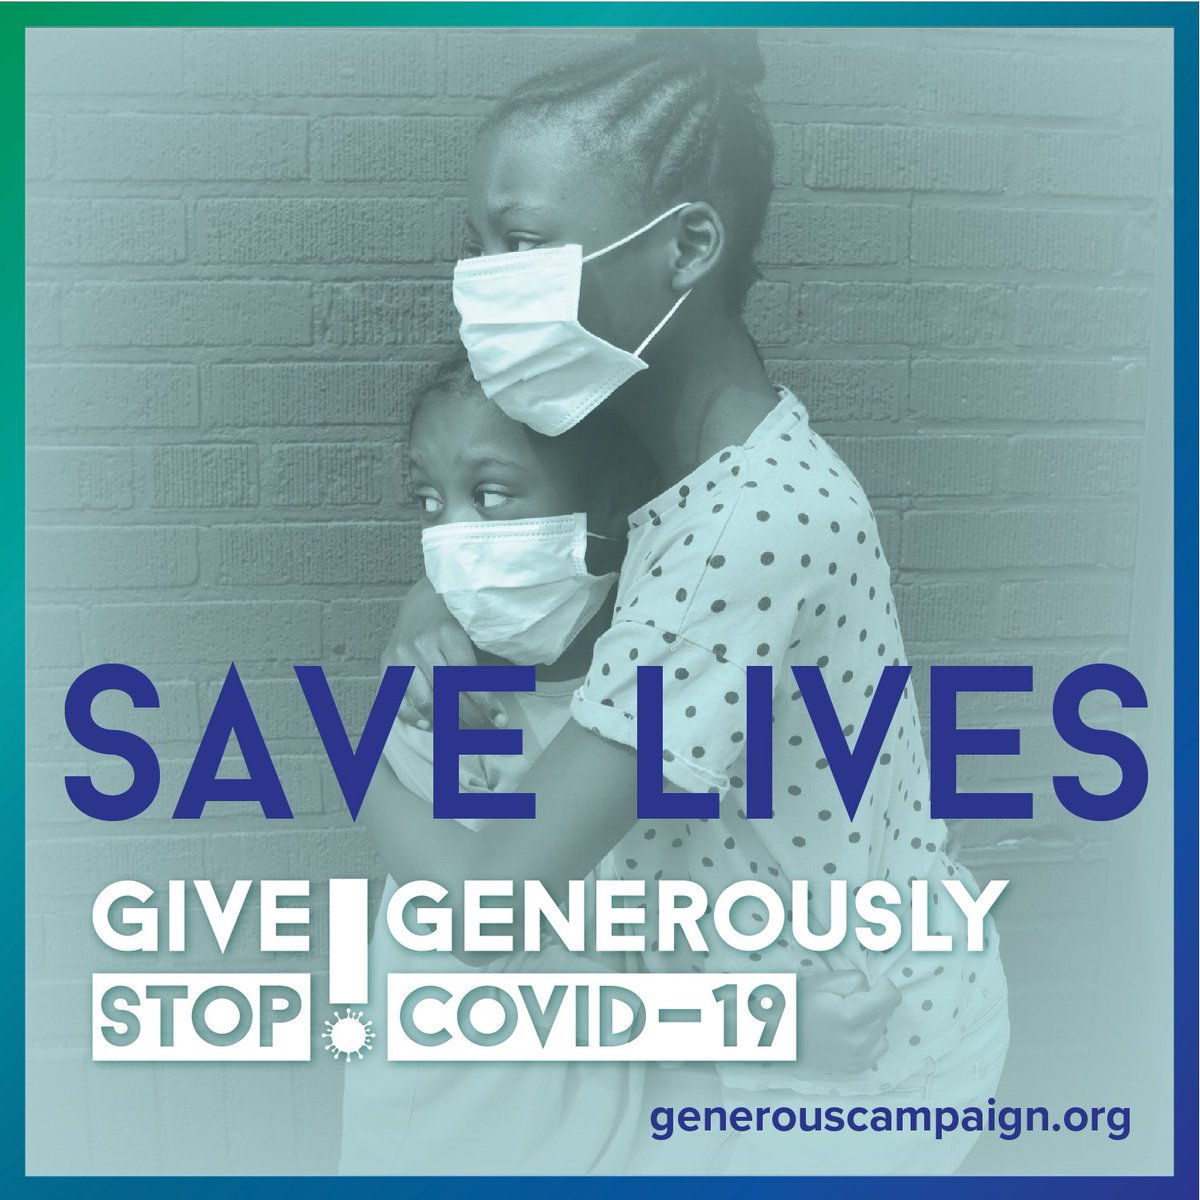 More than ever, it’s up to all of us to work together to #EndCOVID19Now. The distinction between Low-Income, Middle-Income and High-Income countries is no longer relevant – we are all affected, and our leaders must #GiveGenerously #SaveLives. #GenerousCampaign